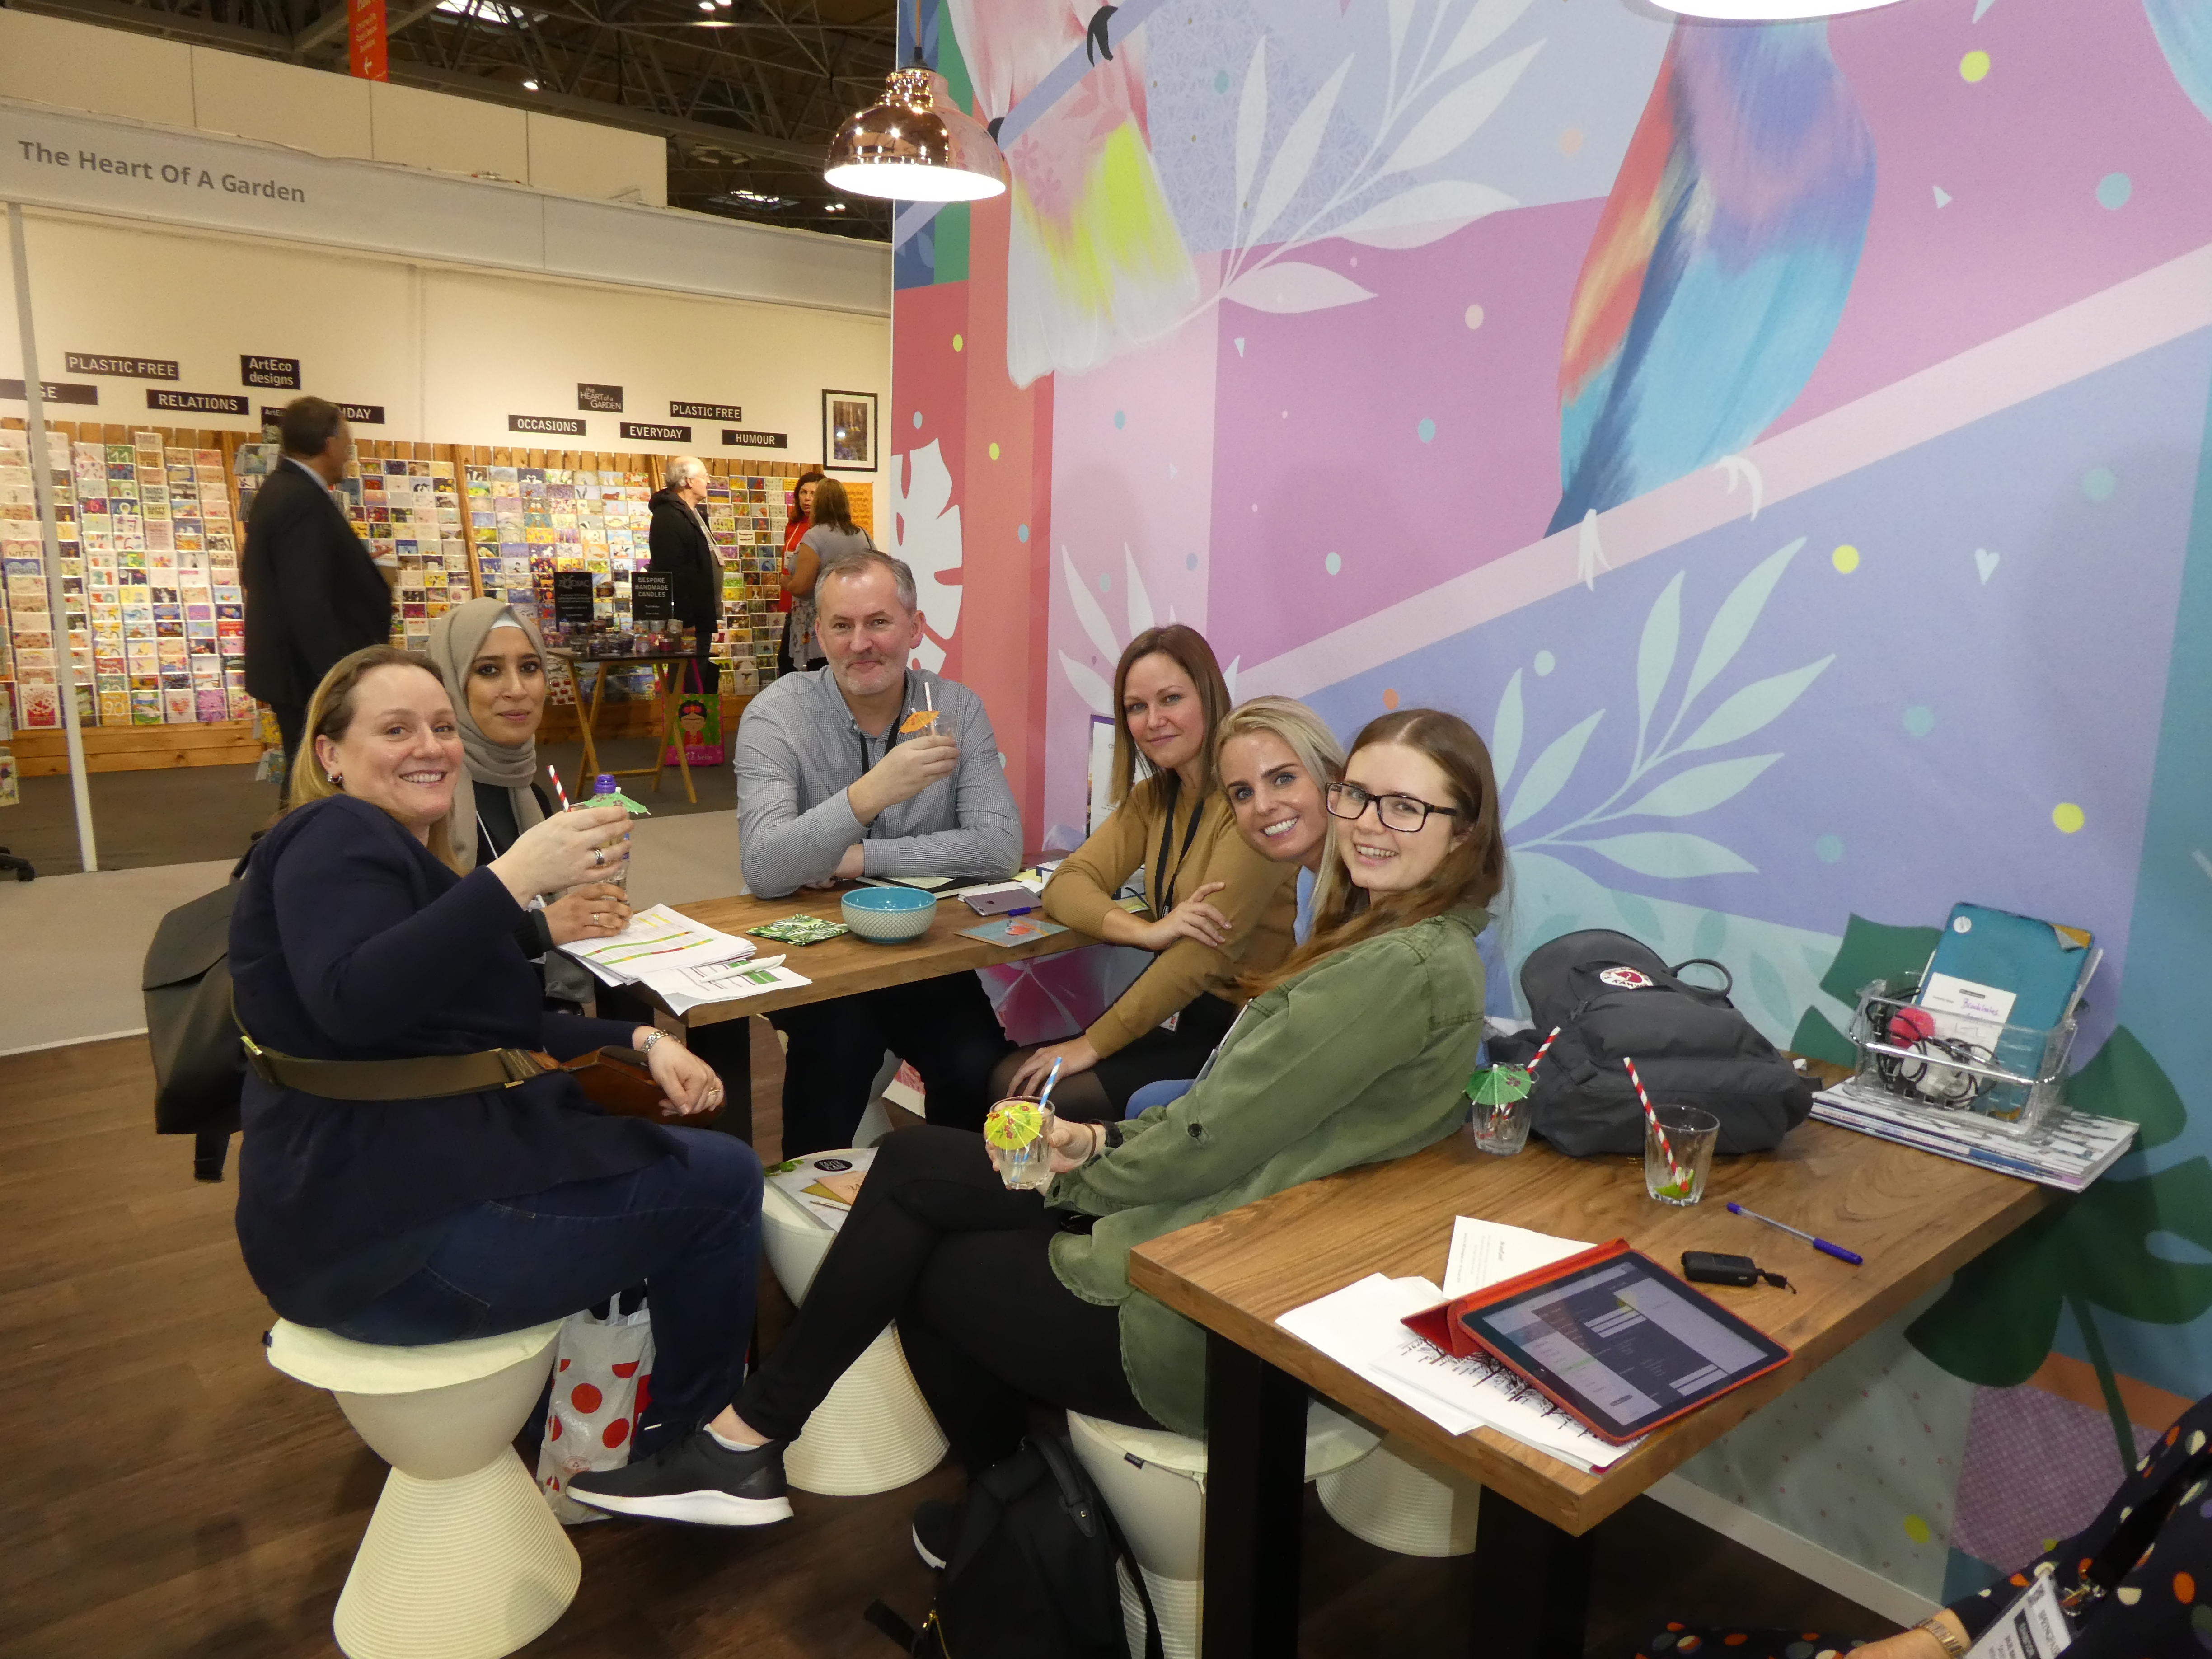 Above: Members of the John Lewis buying team with Woodmansterne’s Keith Gillespie on the publisher’s stand enjoying a cocktail at the end of the day. 